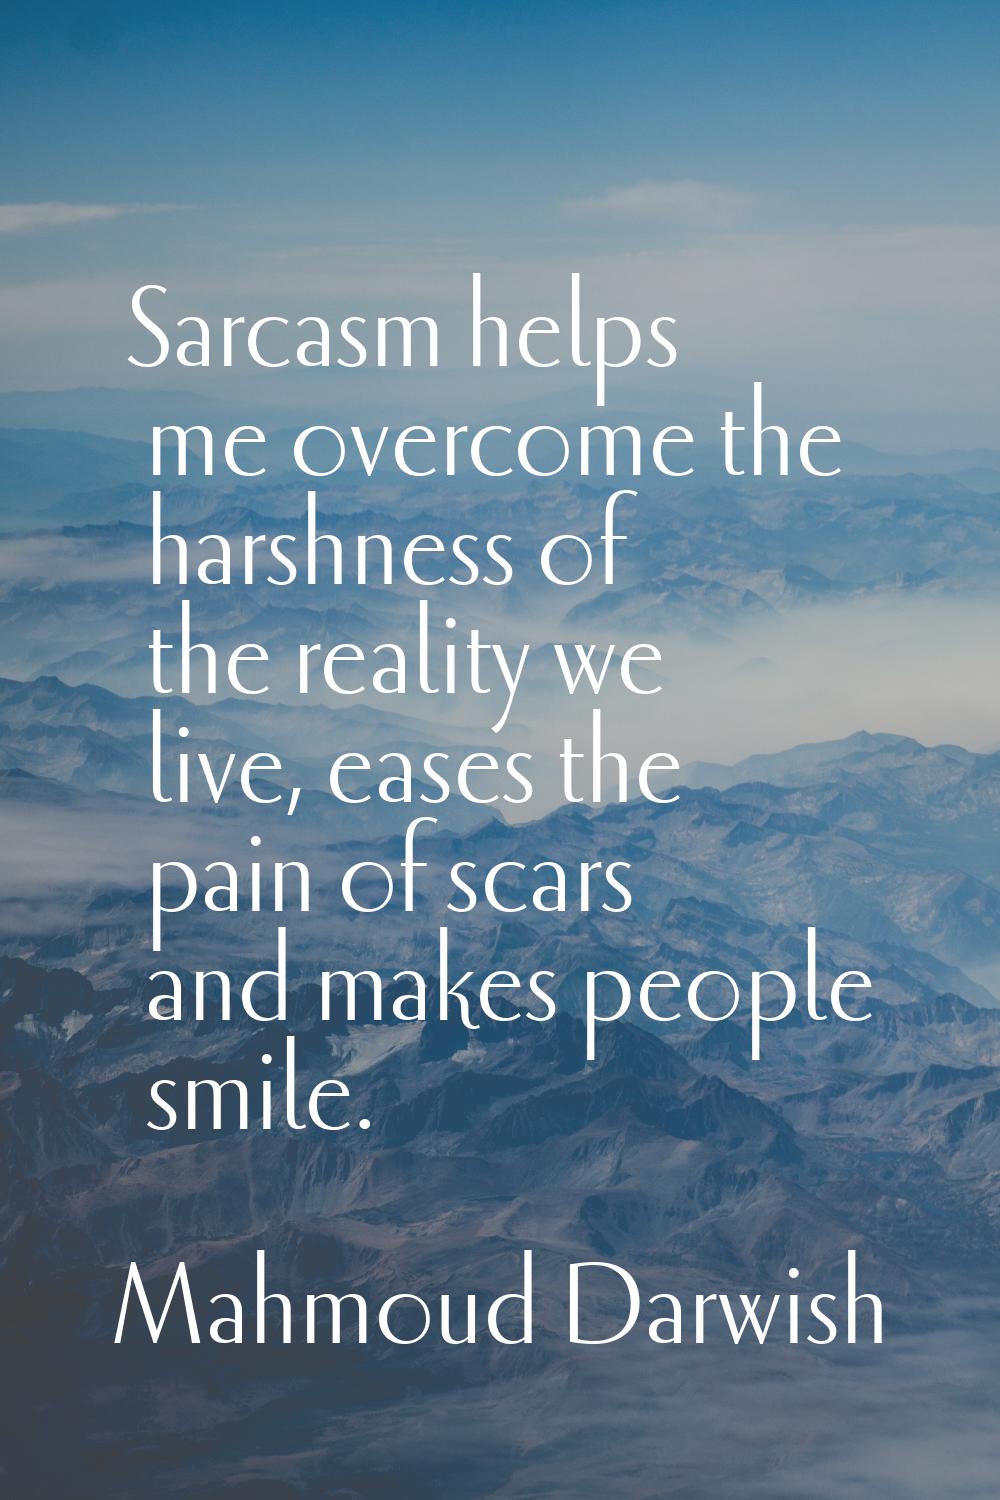 Sarcasm helps me overcome the harshness of the reality we live, eases the pain of scars and makes p